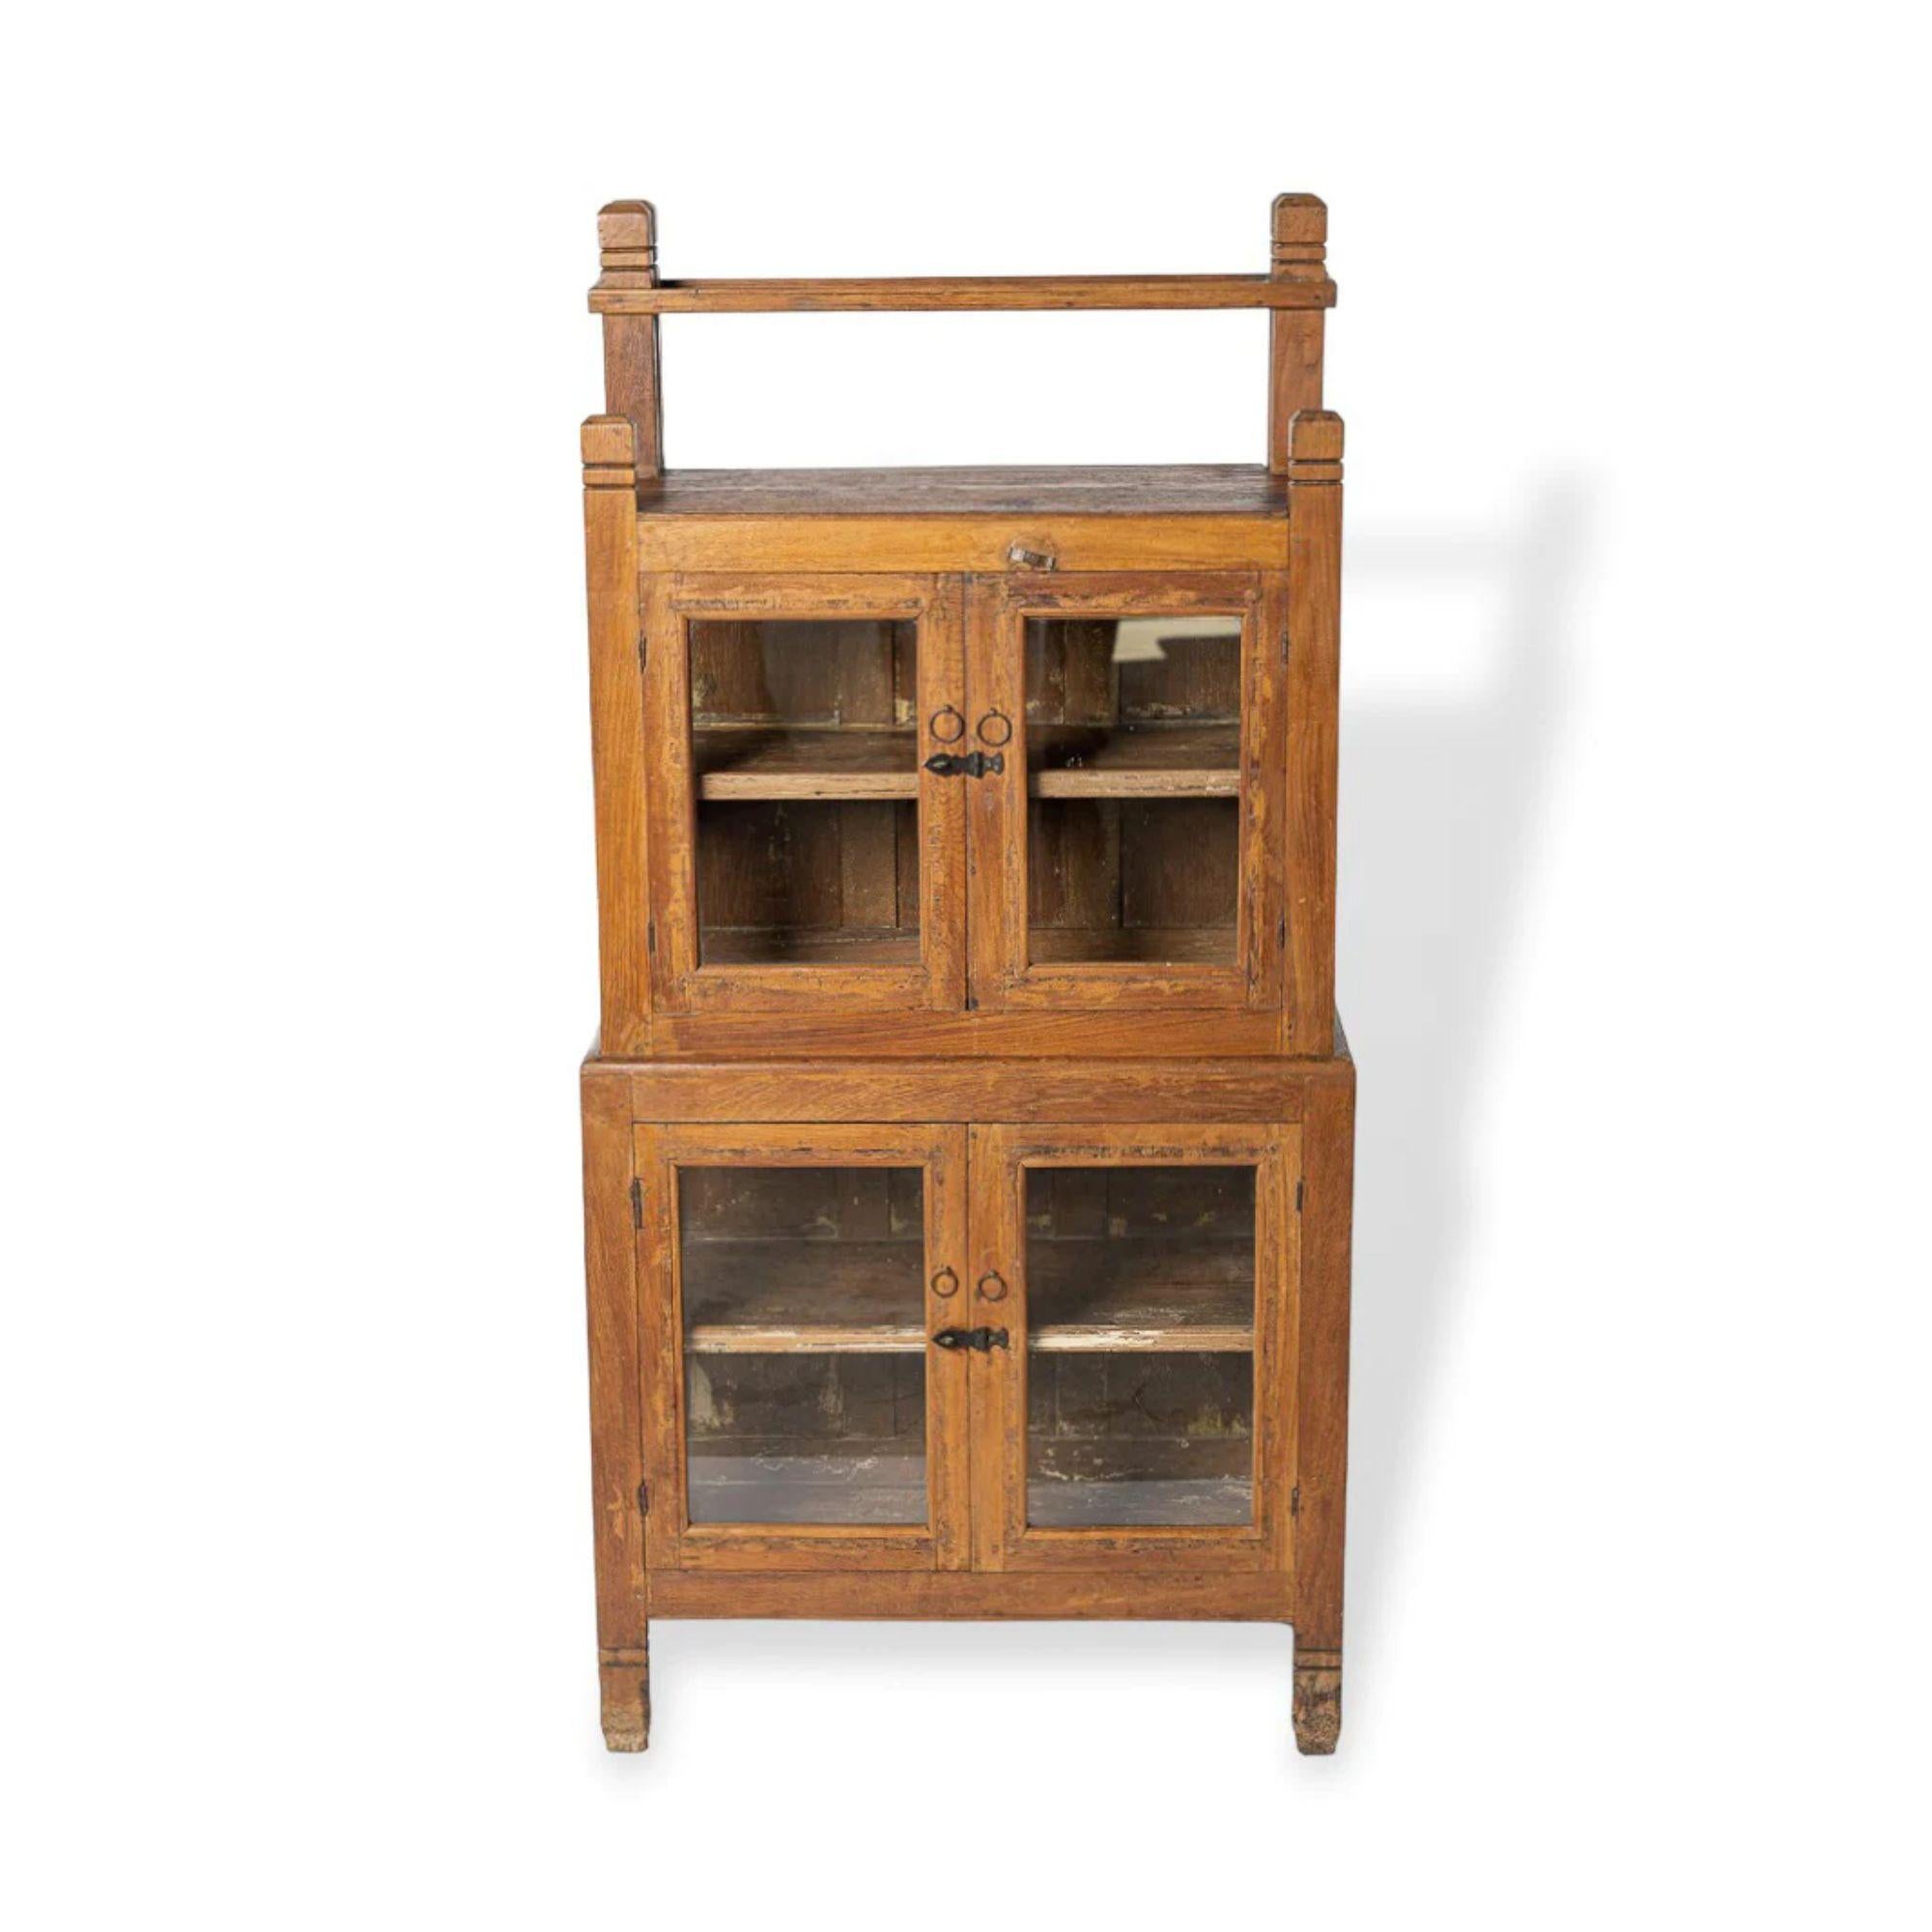 This incredible antique Portuguese wooden farmhouse display cabinet circa 1900 is perfectly aged with great rustic character. Meticulously handcrafted and thoughtfully designed with incredible detailing makes this one-of-a-kind cabinet a true